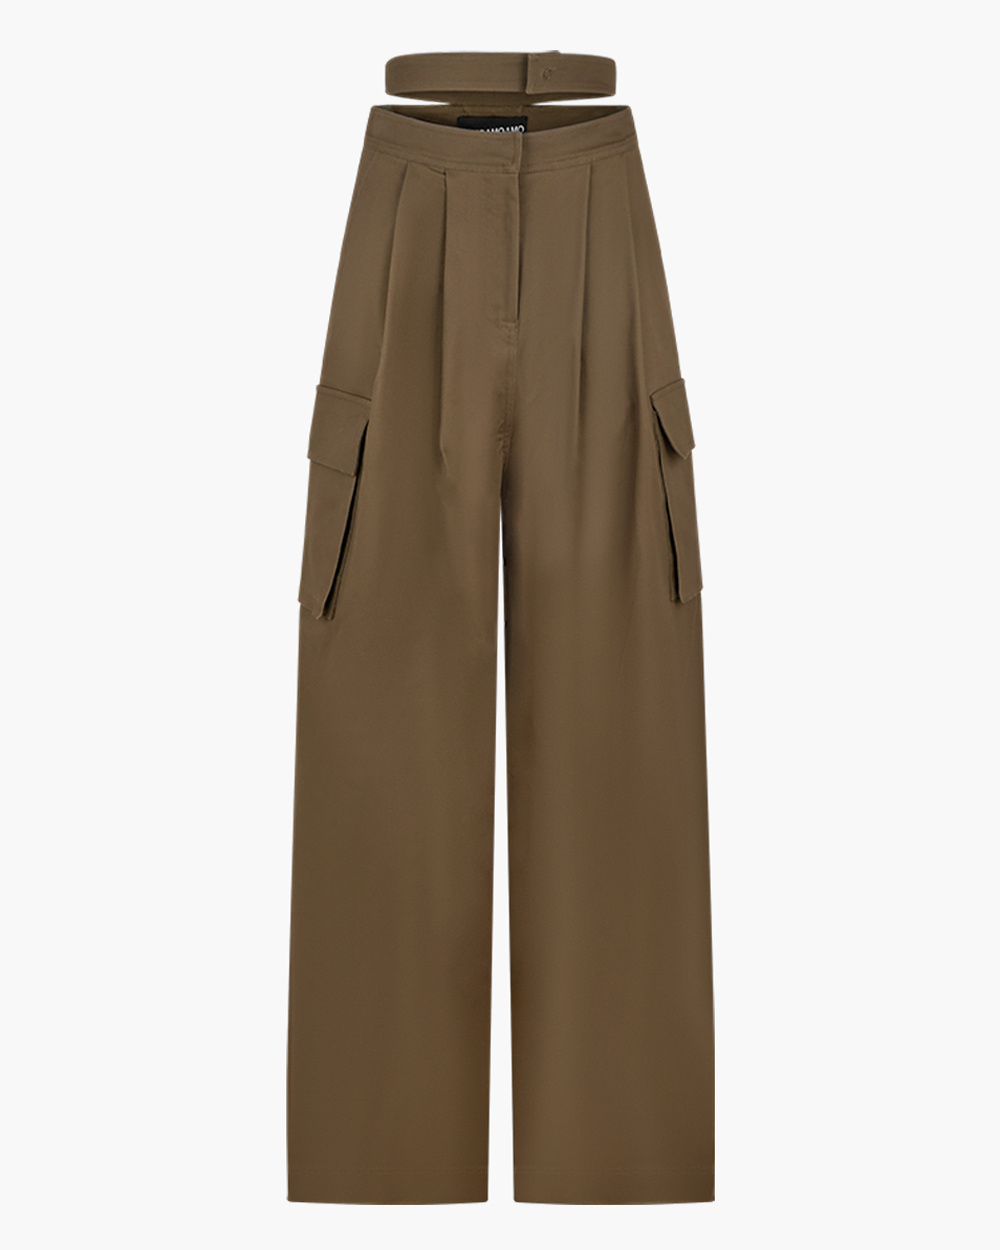 TROUSERS WITH DOUBLE BELT BROWN